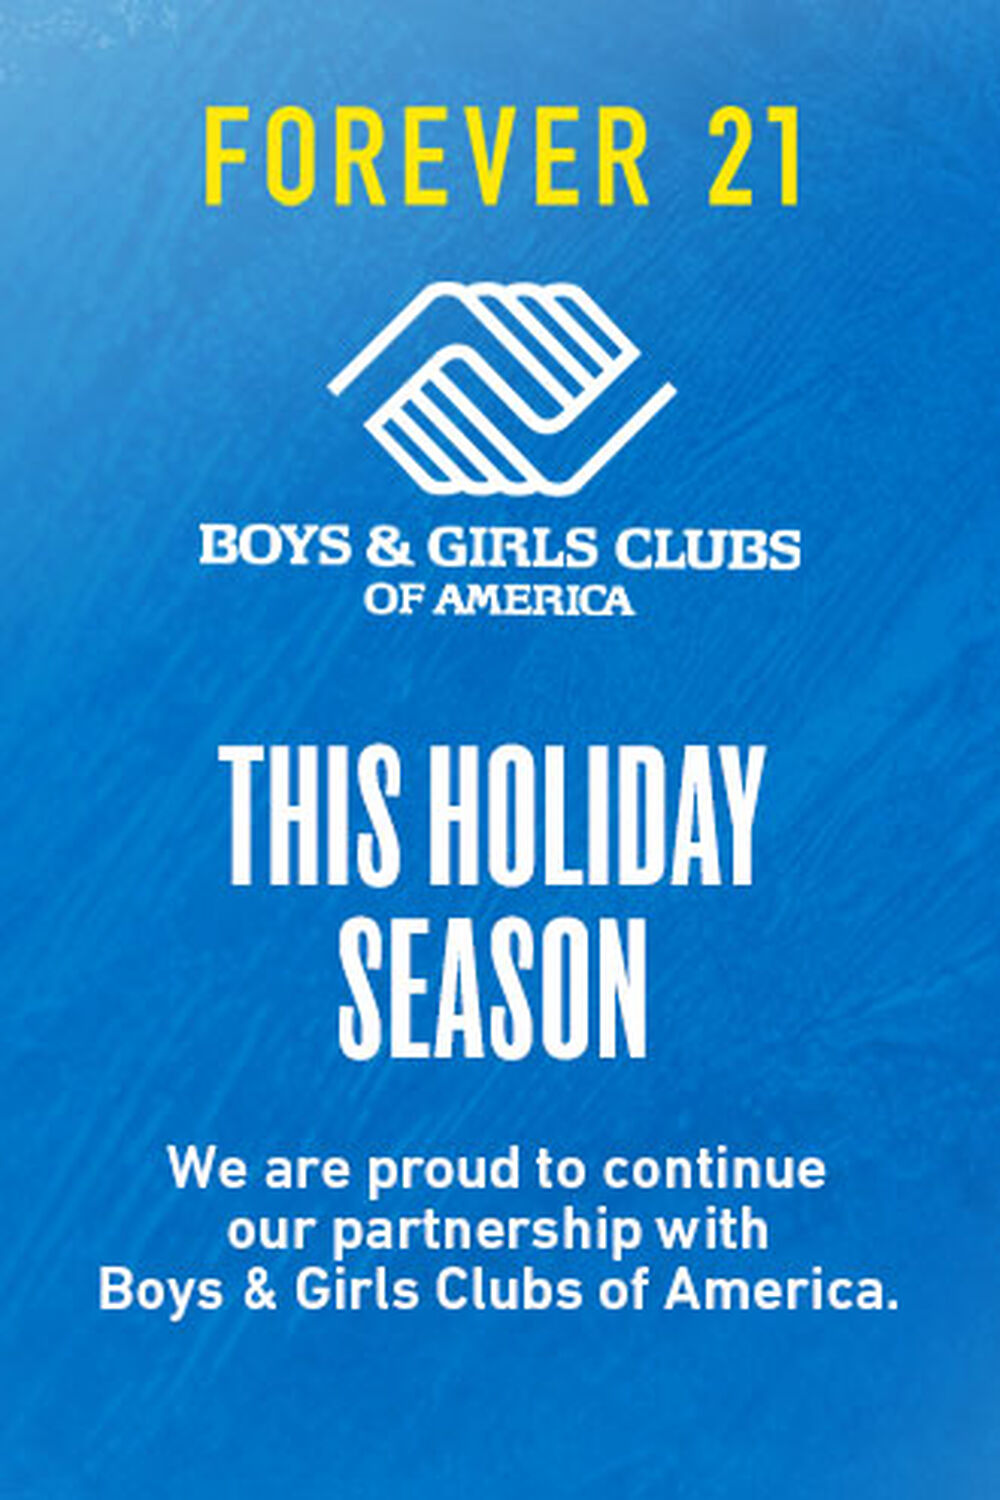 Boys and Girls Clubs of America, image 1